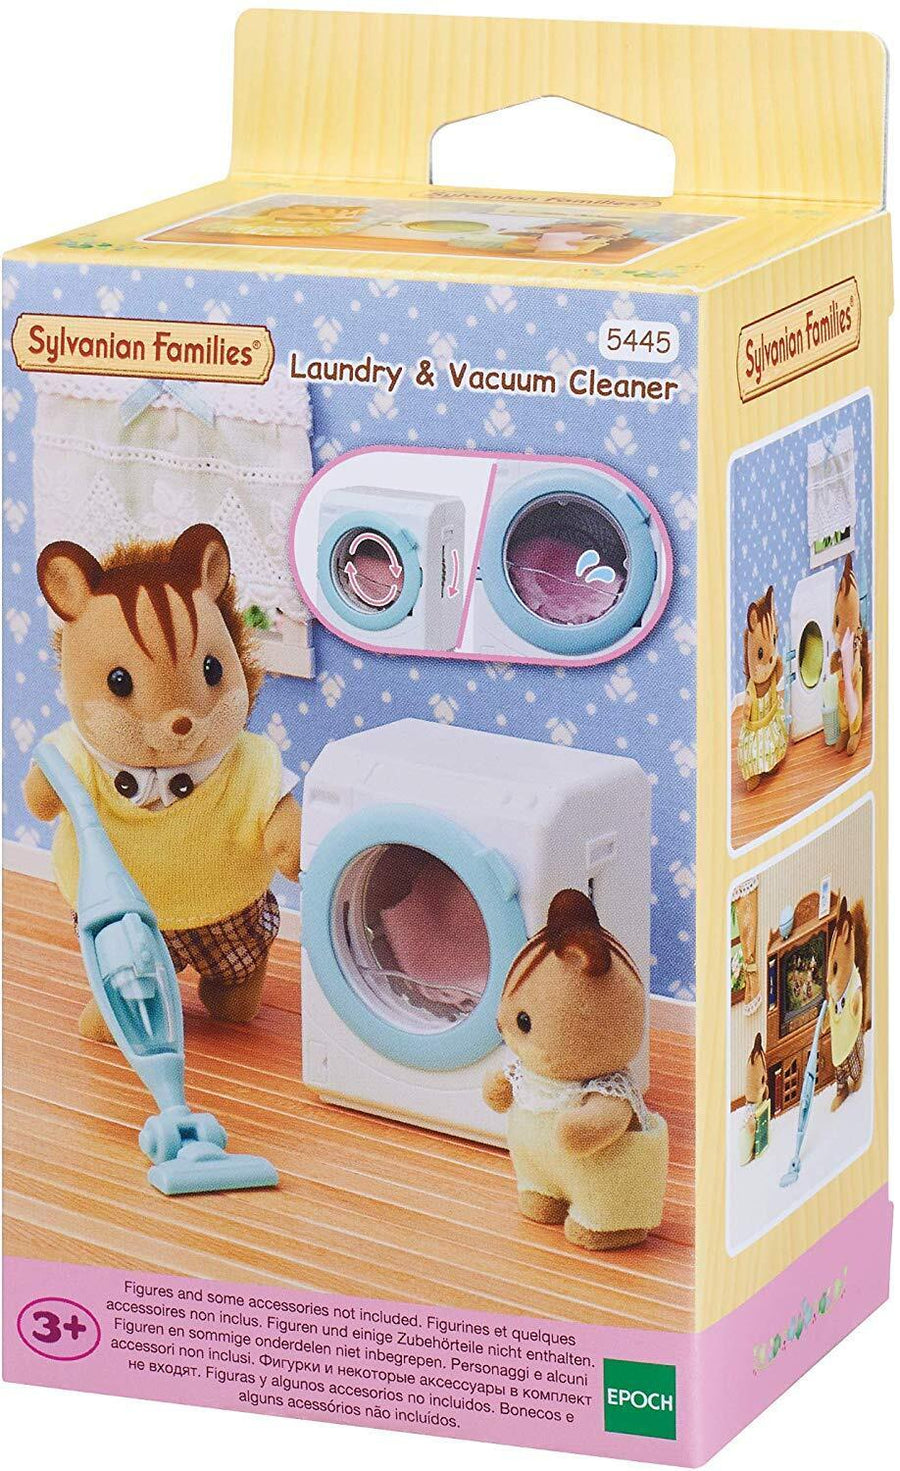 Sylvanian Families 5445 Laundry and Vacuum Cleaner Set box